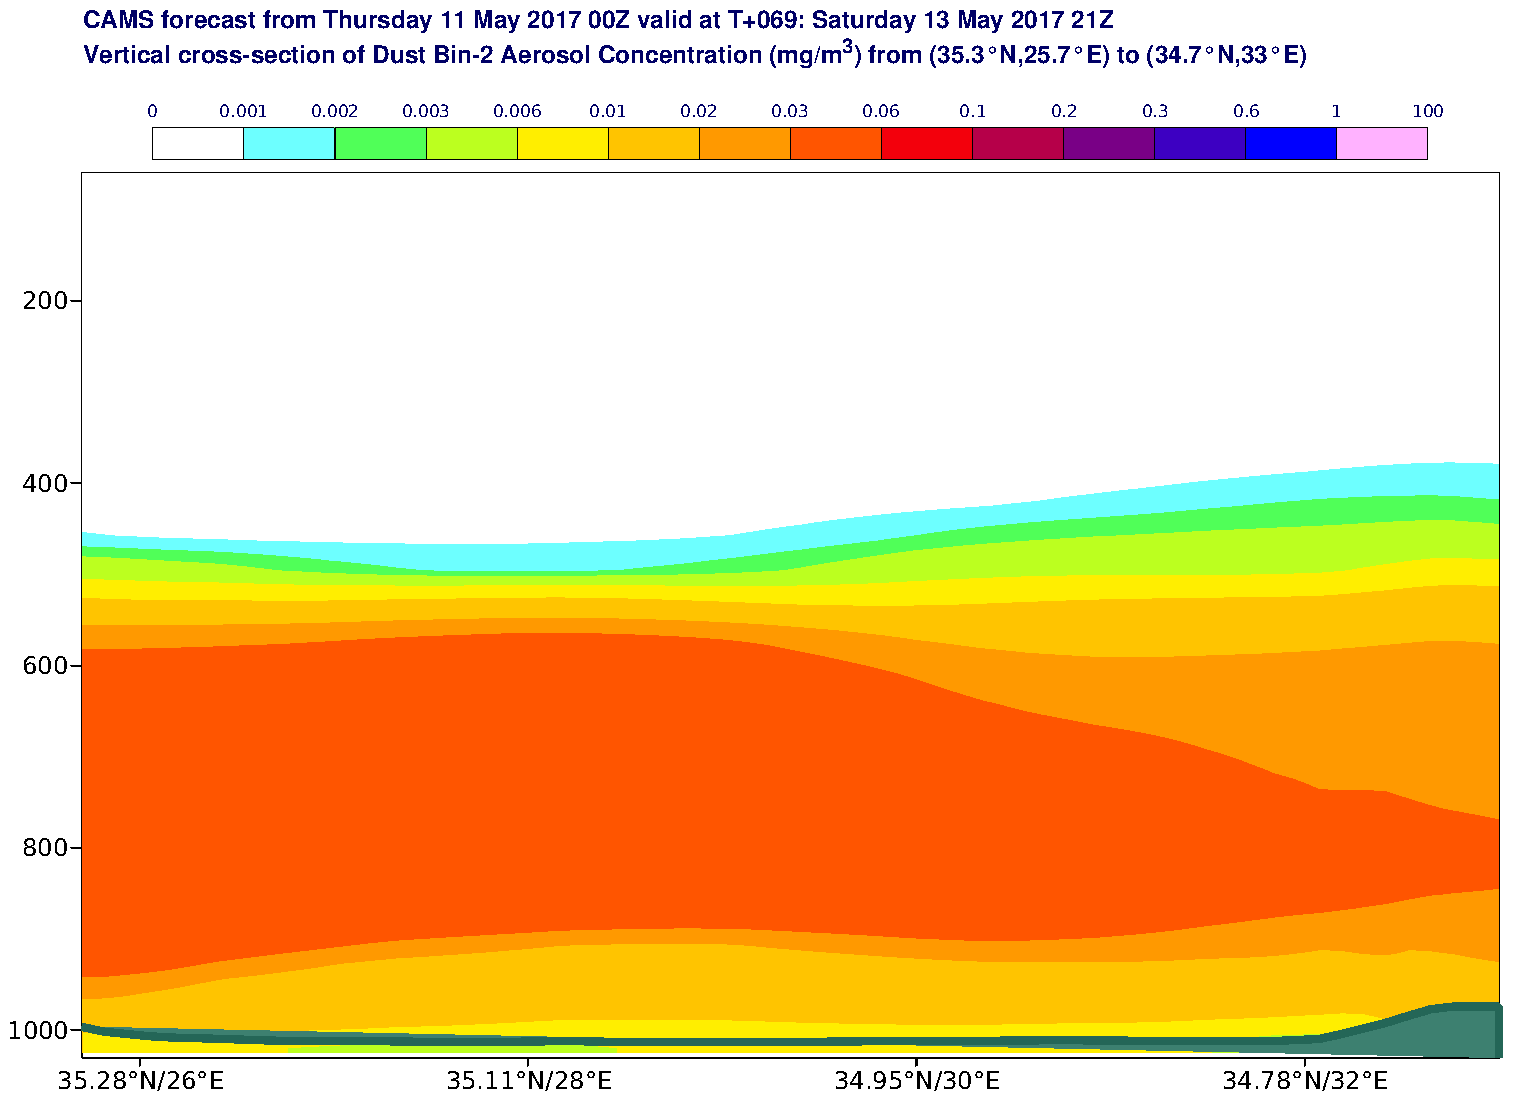 Vertical cross-section of Dust Bin-2 Aerosol Concentration (mg/m3) valid at T69 - 2017-05-13 21:00